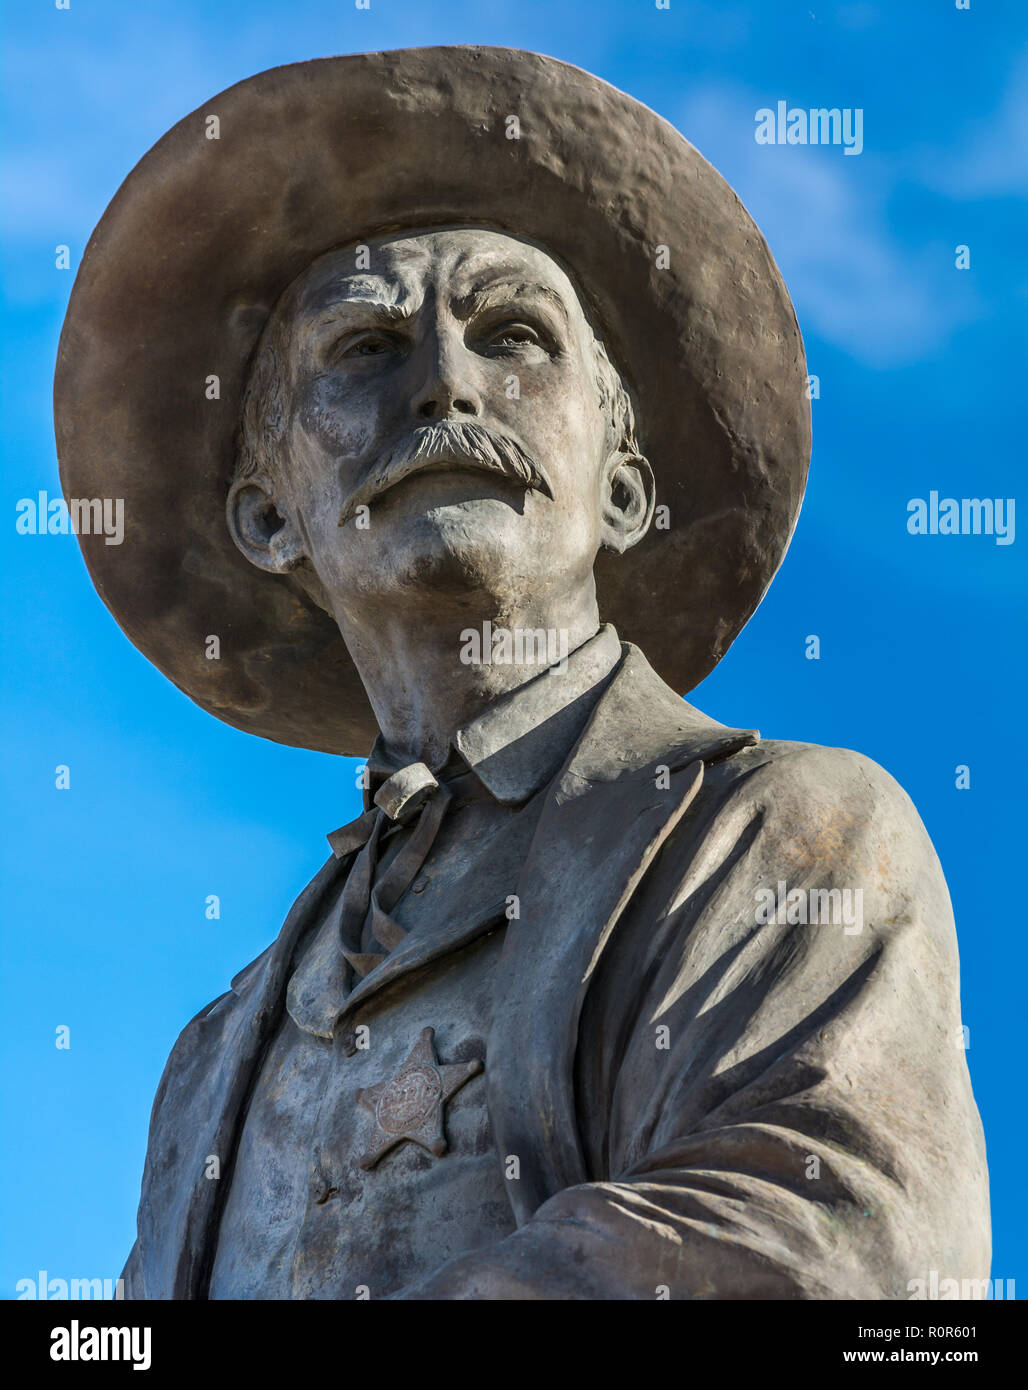 Pat Garrett statue closeup of old west sheriff known as the man who killed outlaw Billy the Kid, sculpture by Robert Summers. Stock Photo